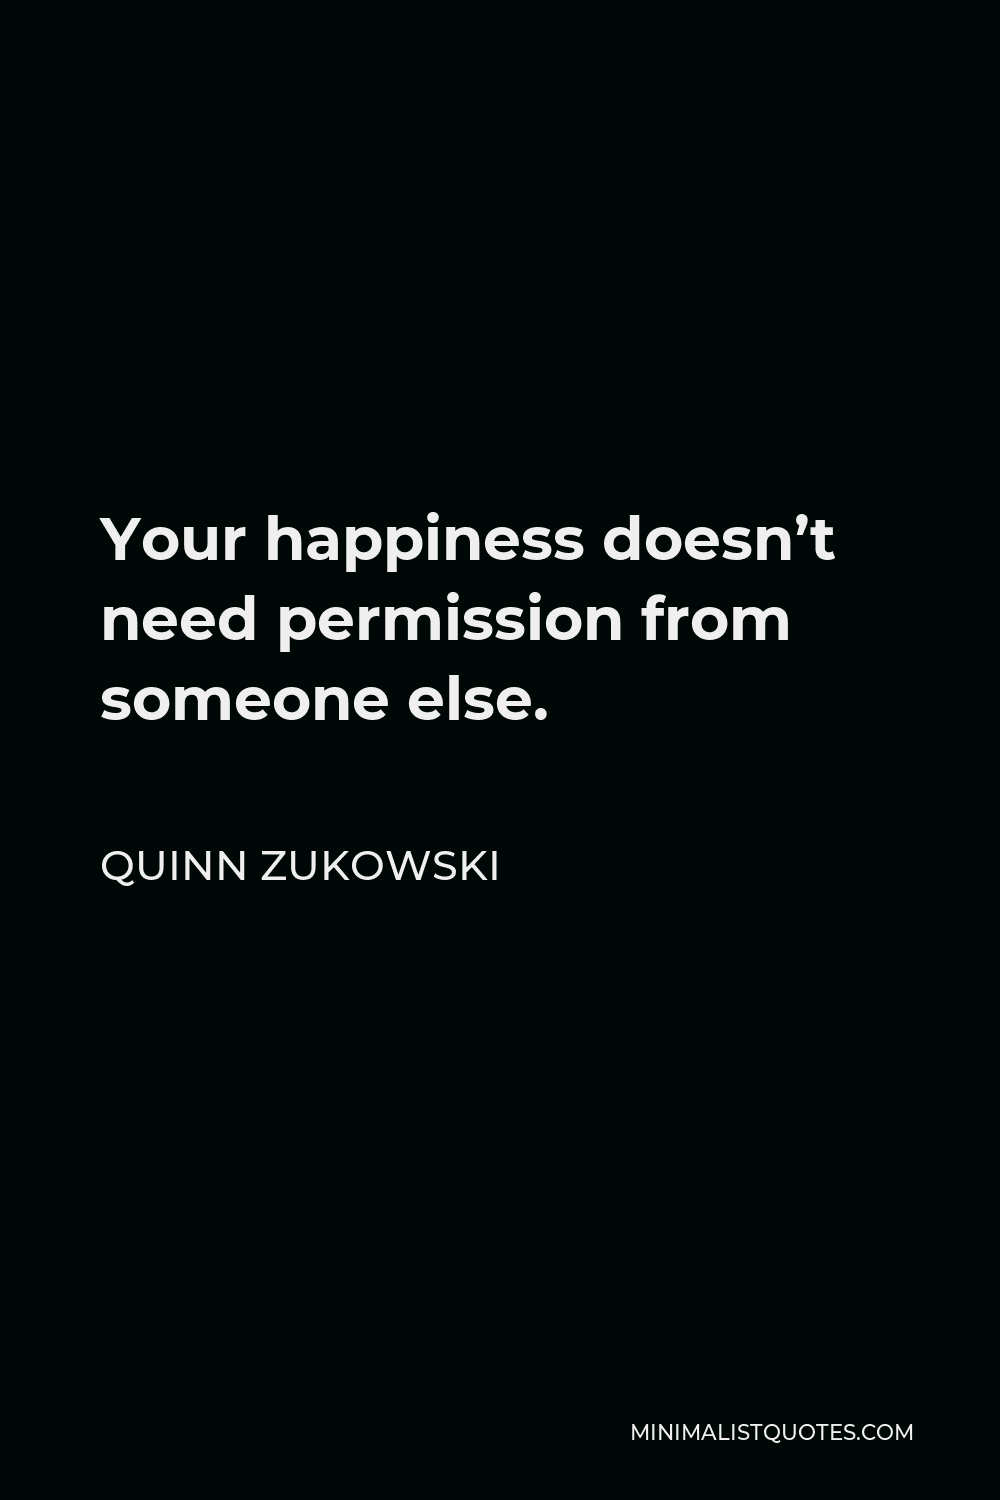 Quinn Zukowski Quote - Your happiness doesn’t need permission from someone else.